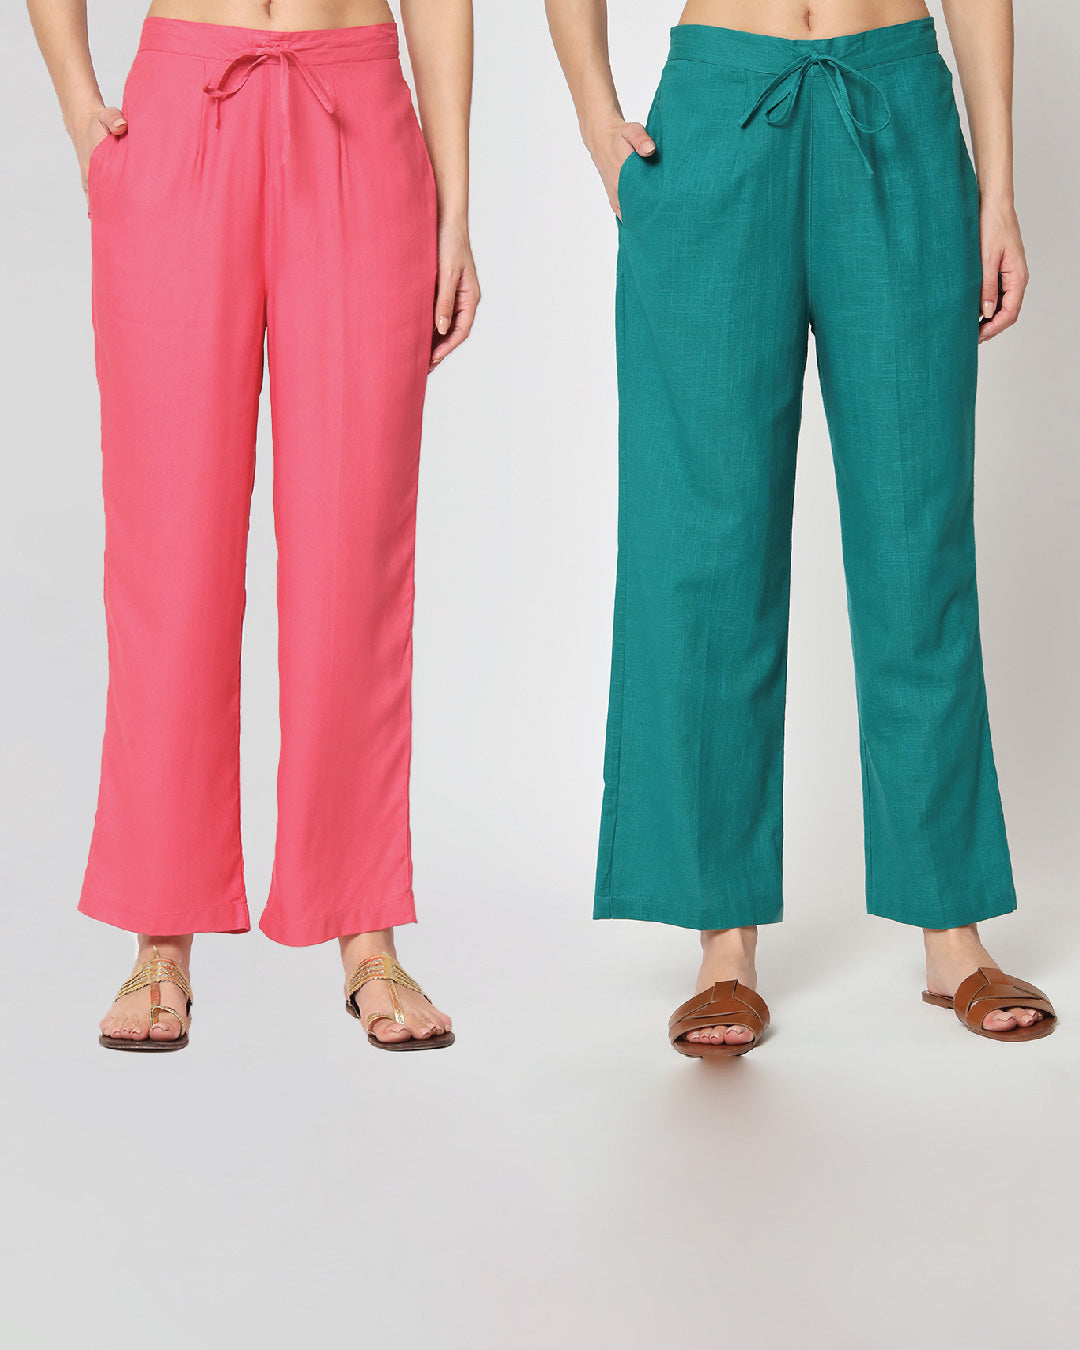 Combo: Coral Burst & Forest Green Straight Pants- Set of 2